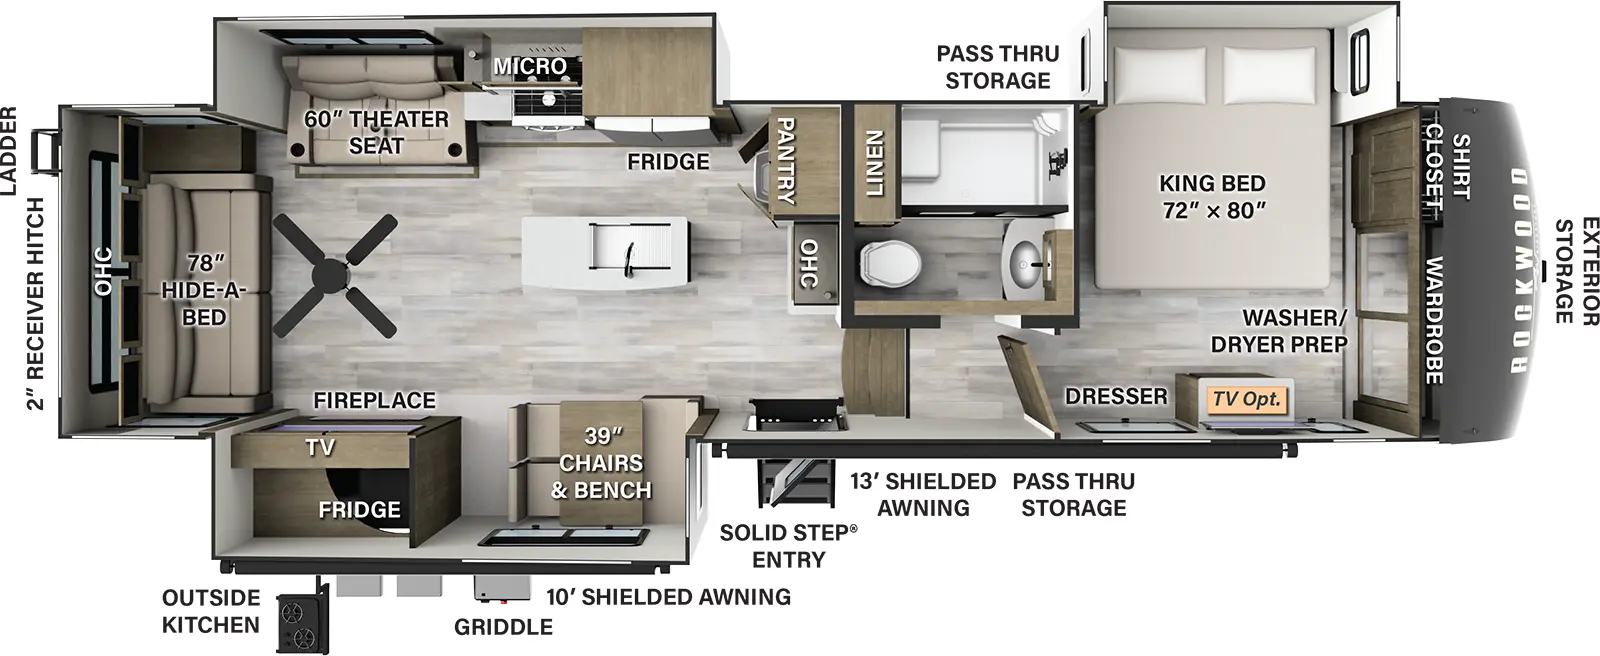 The 372RL has three slide outs and one entry. Exterior features a 10 foot shielded awning and 13 foot shielded awning, solid step entry, outside kitchen with refrigerator, griddle, exterior storage, pass through storage, rear ladder, and 2 inch receiver hitch. Interior layout front to back: front bedroom with off-door side king bed slide out, front shirt closet and wardrobe with washer/dryer prep, and dresser (TV optional); side aisle full bathroom with linen closet; steps down to kitchen living dining area; kitchen counter with overhead cabinet and pantry along inner wall; off-door side slide out with refrigerator, microwave, cooktop, and theater seat; kitchen island with sink; door side slide out with chairs & bench, TV, and fireplace; rear hide-a-bed sofa, overhead cabinet and paddle fan.